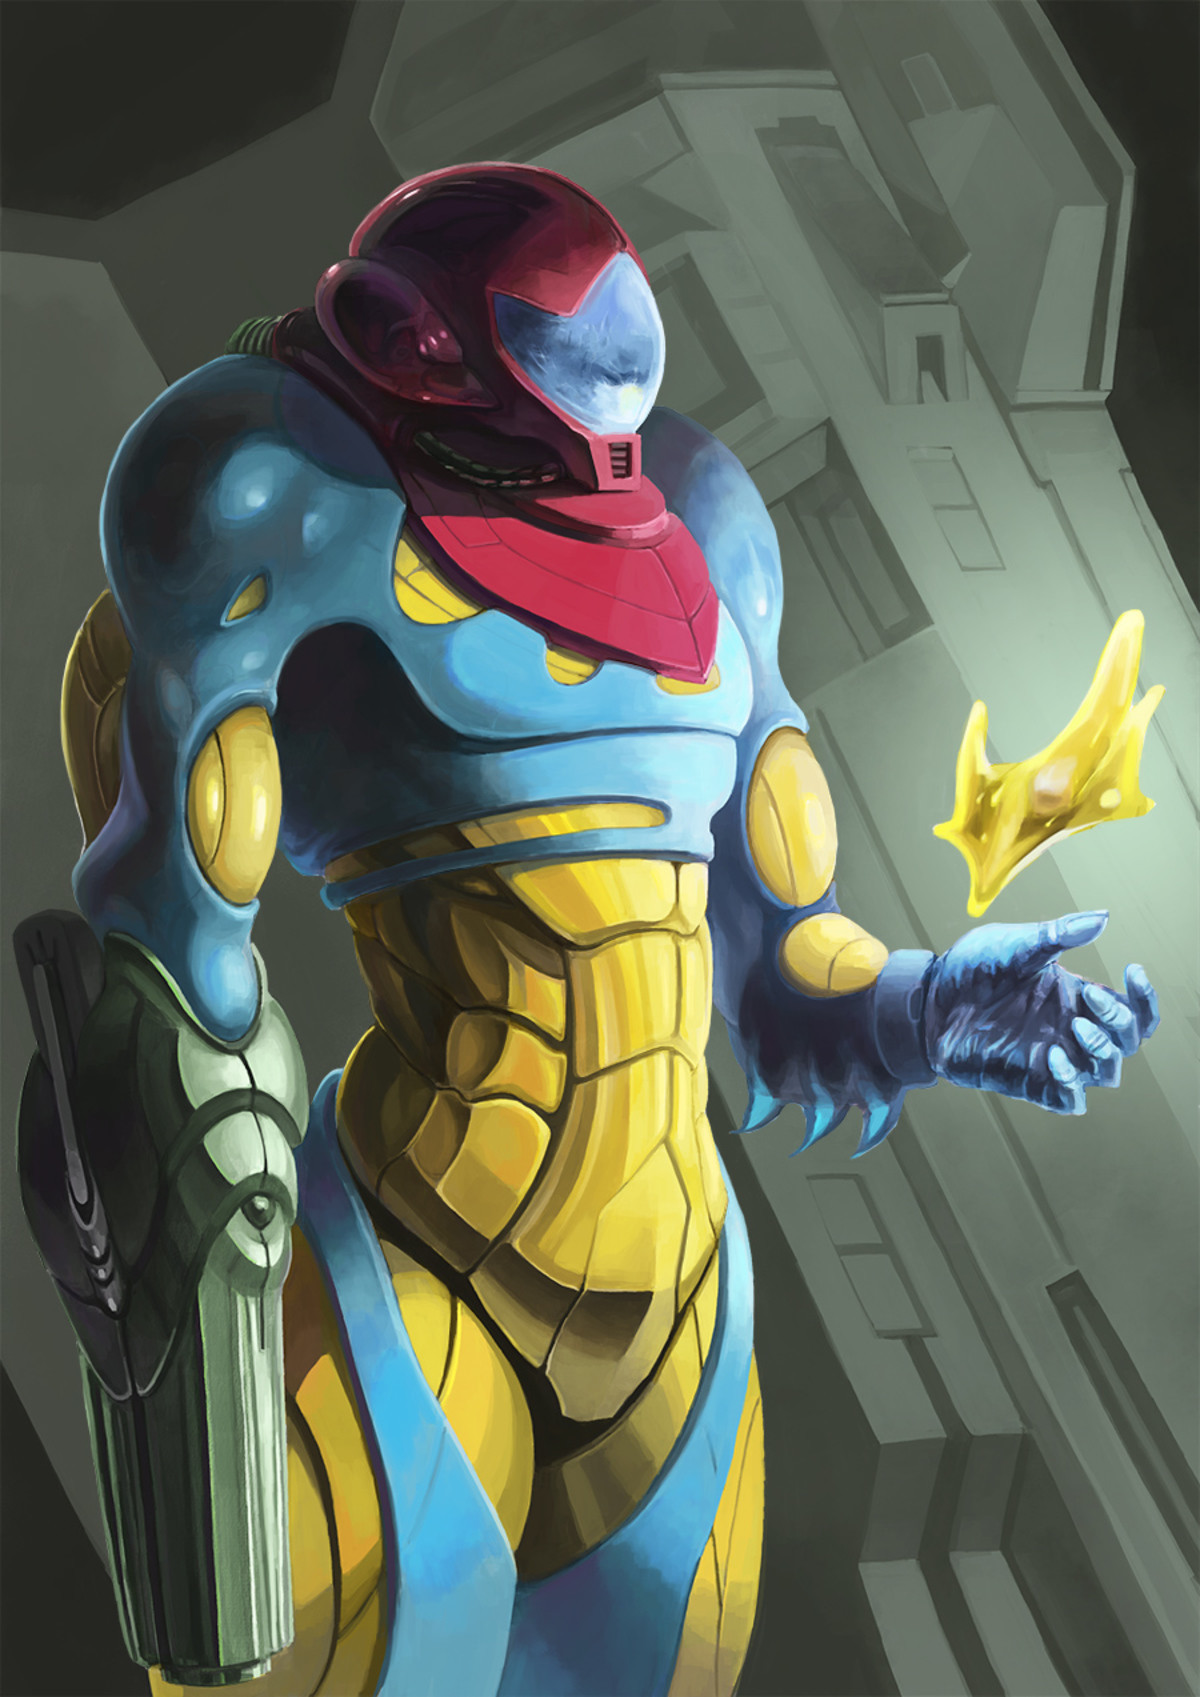 Metroid Megadump 2. .. this comp has some high quality art personally i enjoy smaller comps. my peanut brain can only handle so many things at one time. this gif made me bust out laug